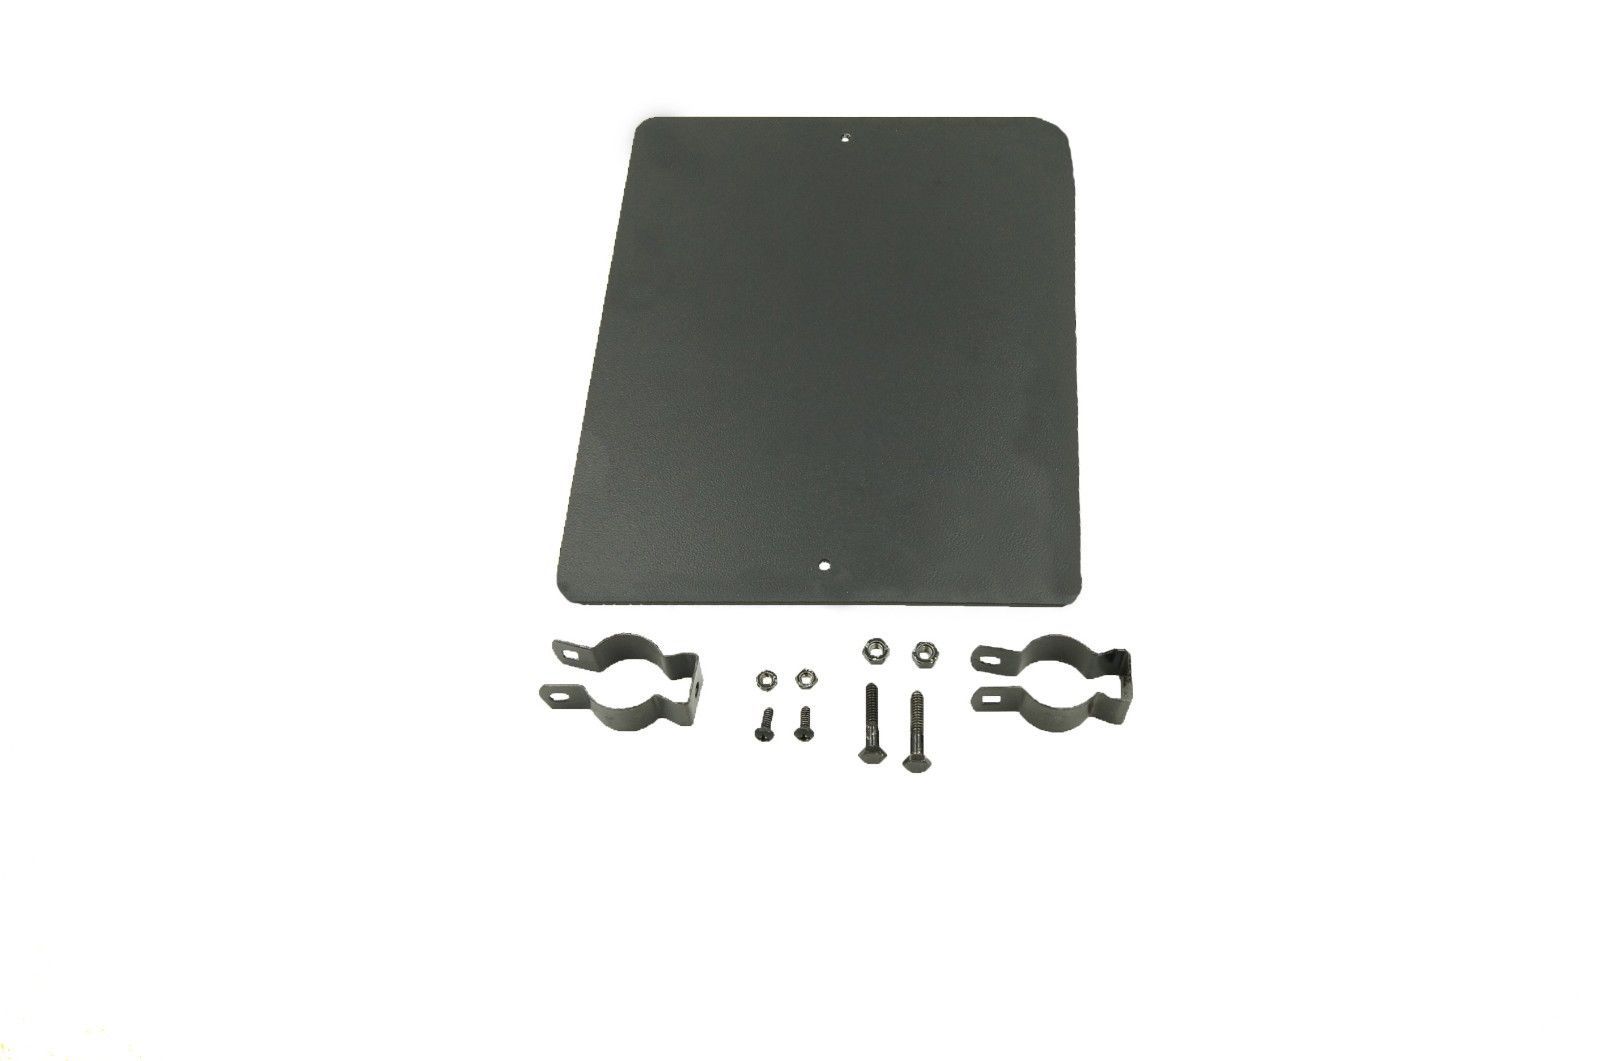 Black Sign Plate for Quik Stage Podium or Lectern - $49.99